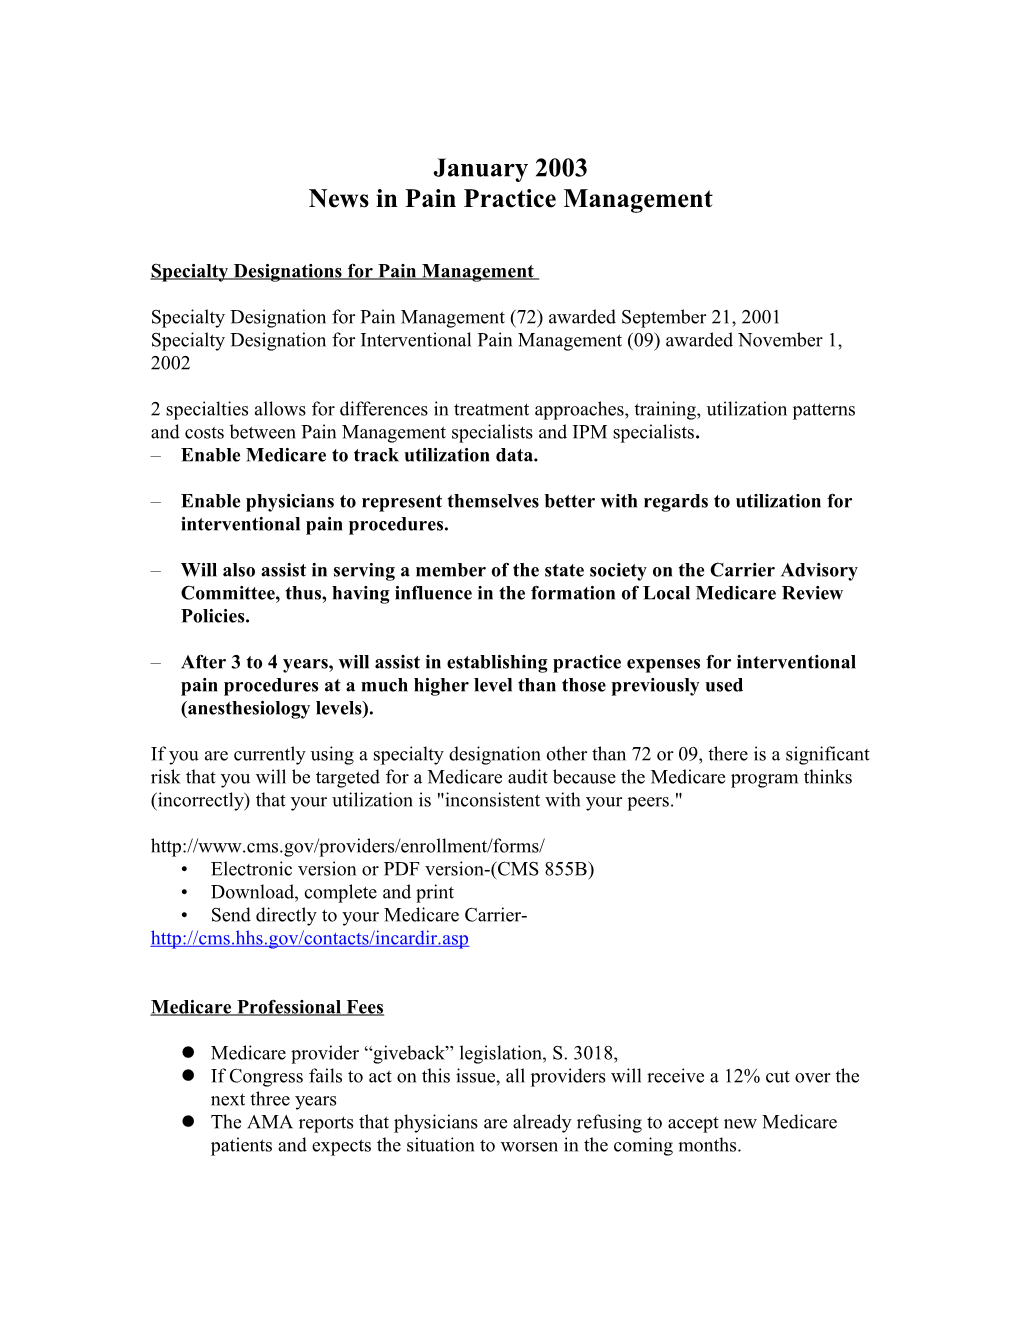 News in Pain Practice Management